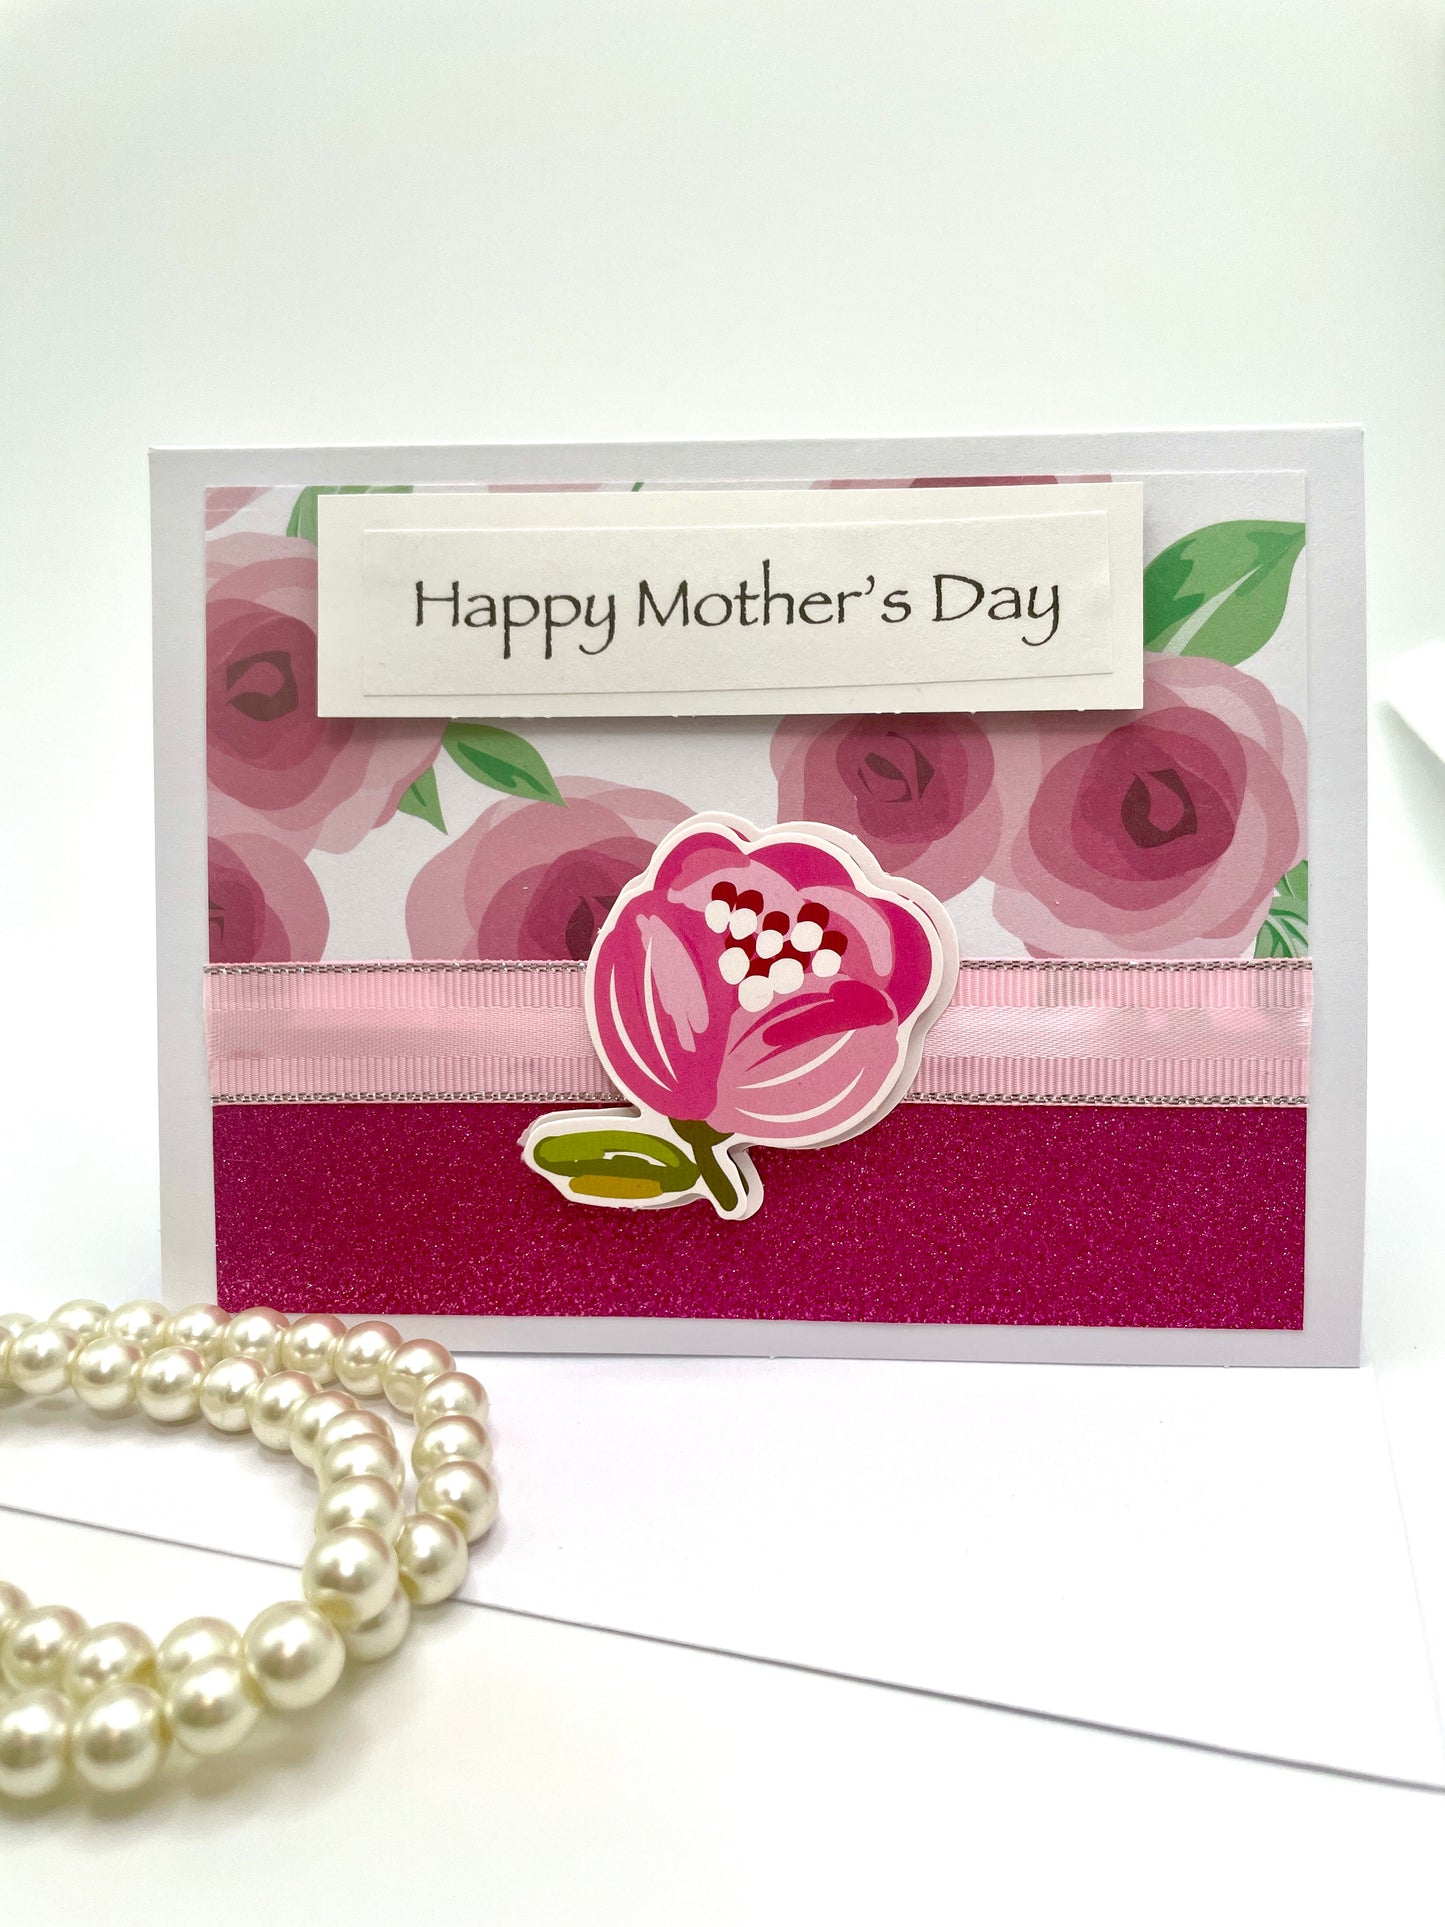 S157 - Mother's Day Card - Pink Floral Glitter